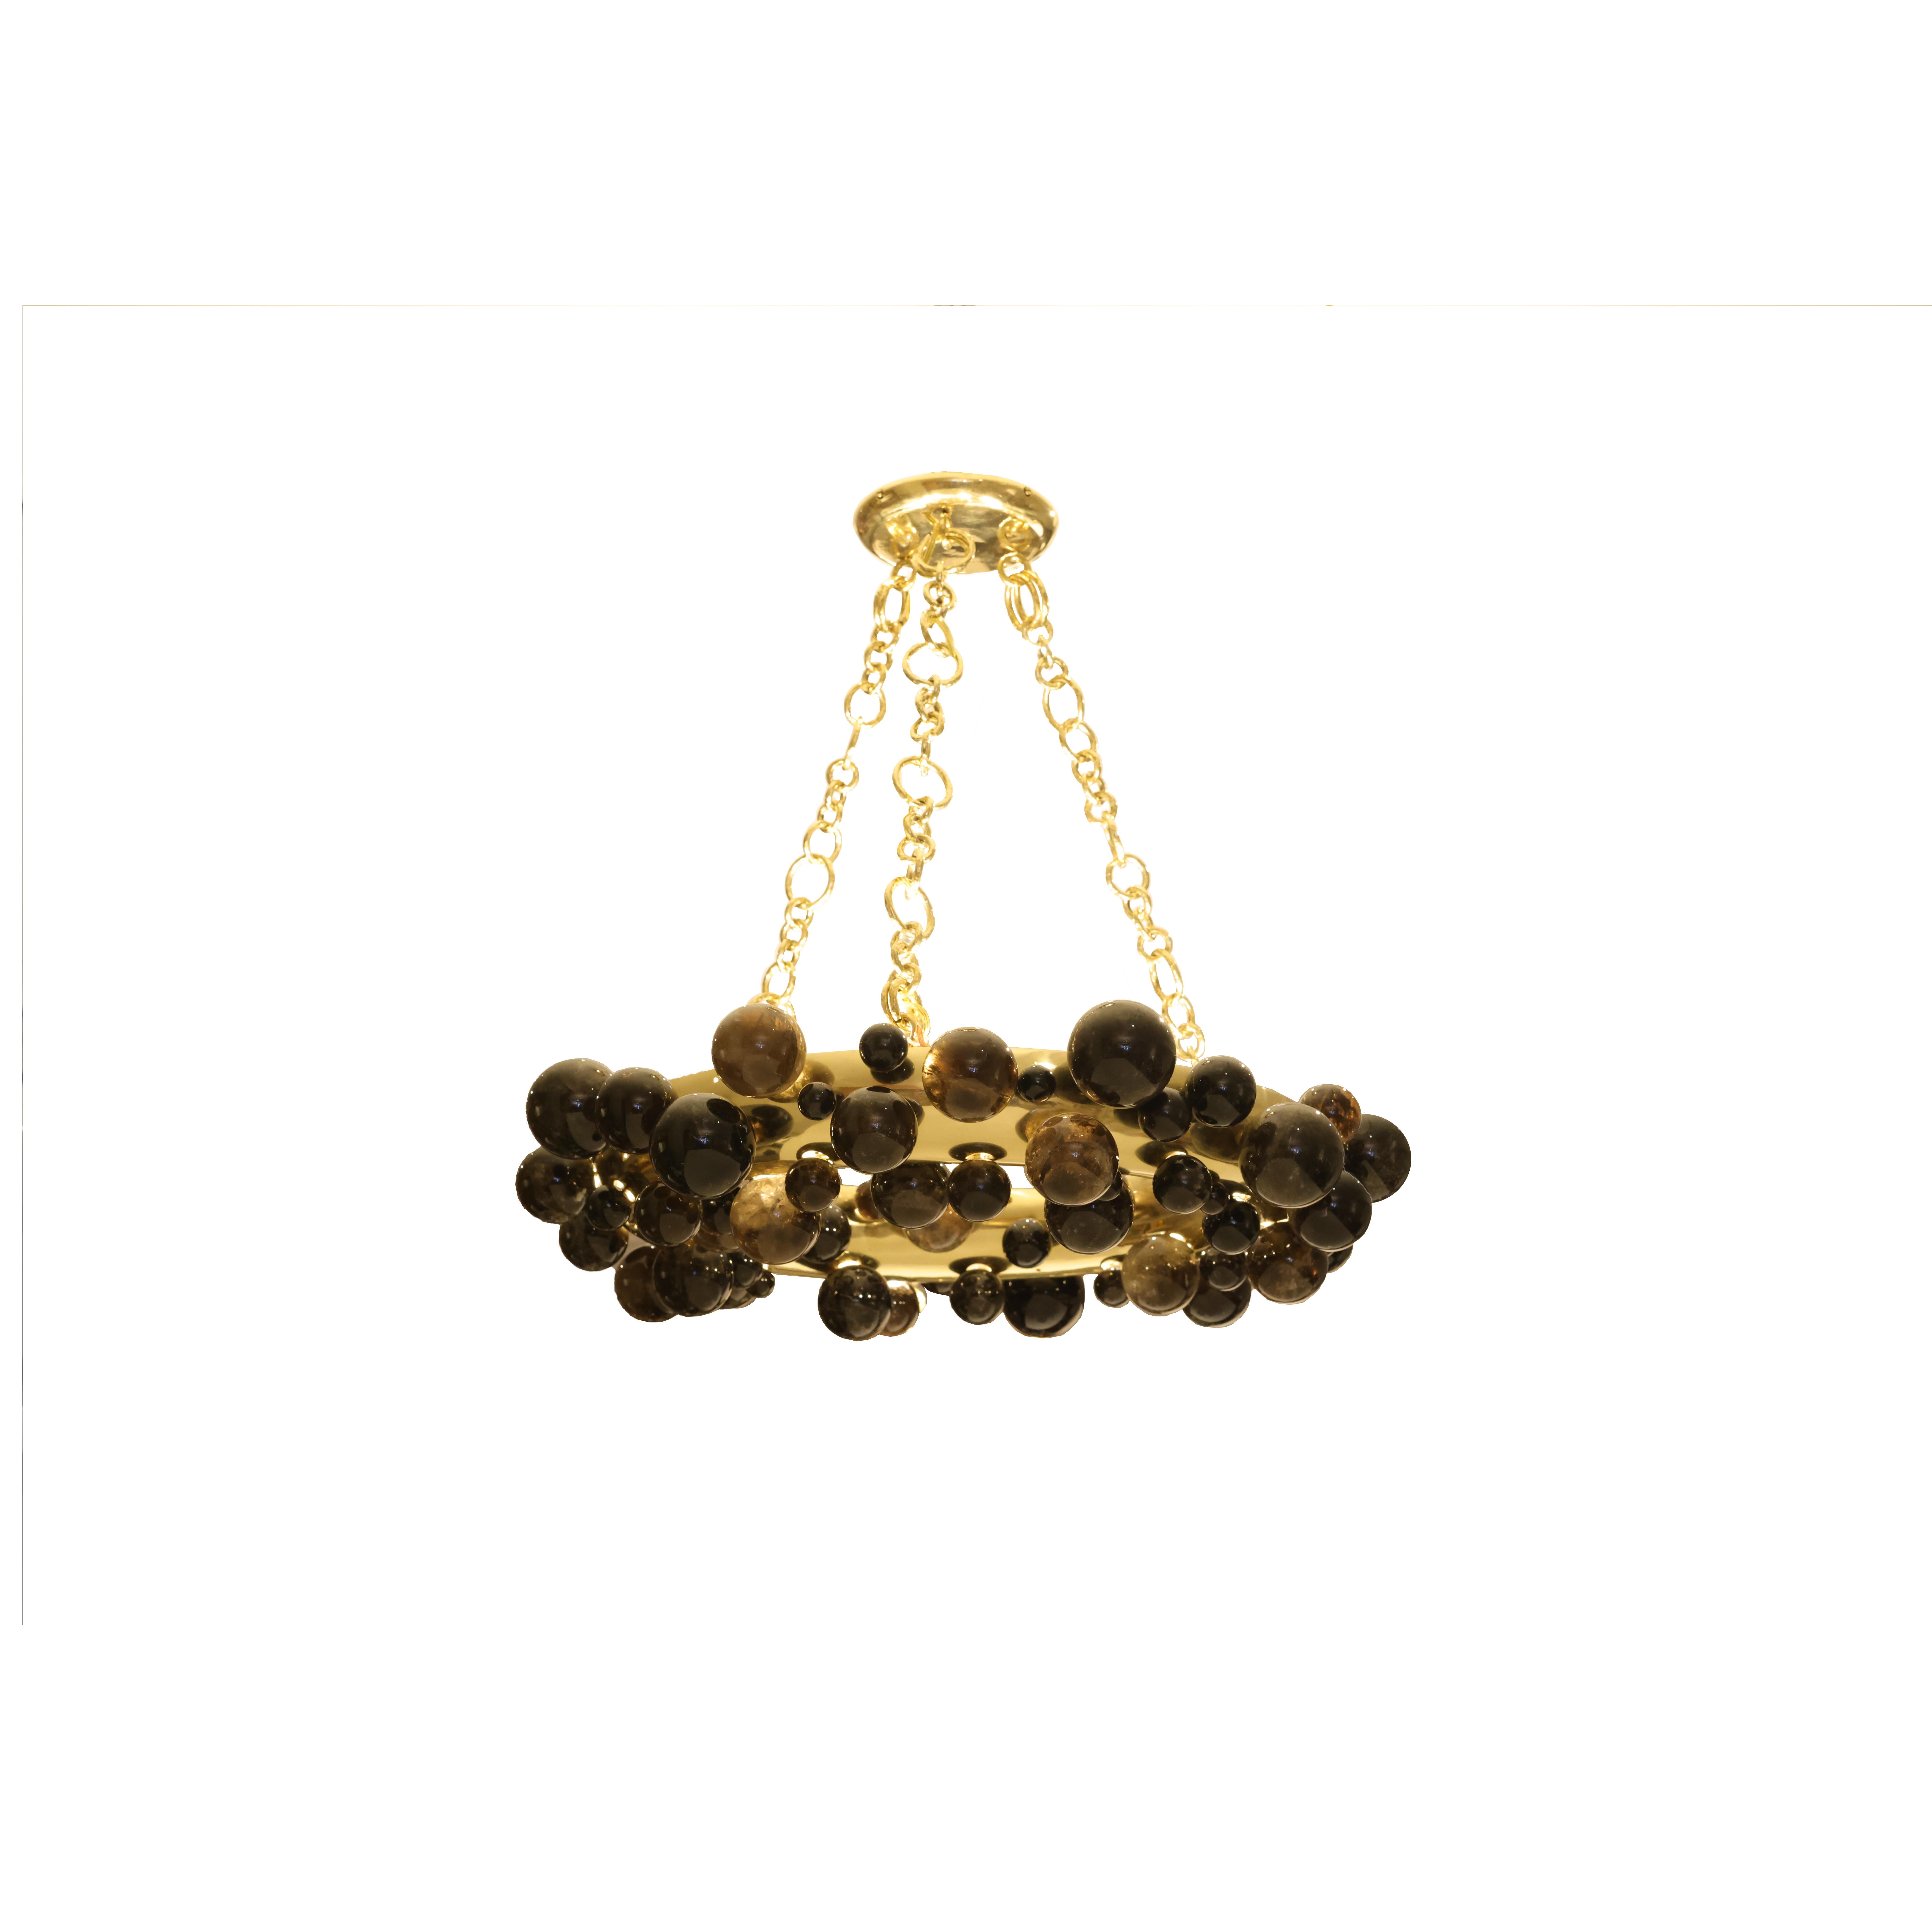 A pair of bubble ring rock crystal chandeliers with polish brass frame. Created by Phoenix Gallery, NYC.
Each chandelier install 10 sockets. Use 60w LED warm light bulbs. Total of 600w. 
Custom size and metal finish upon request.
 